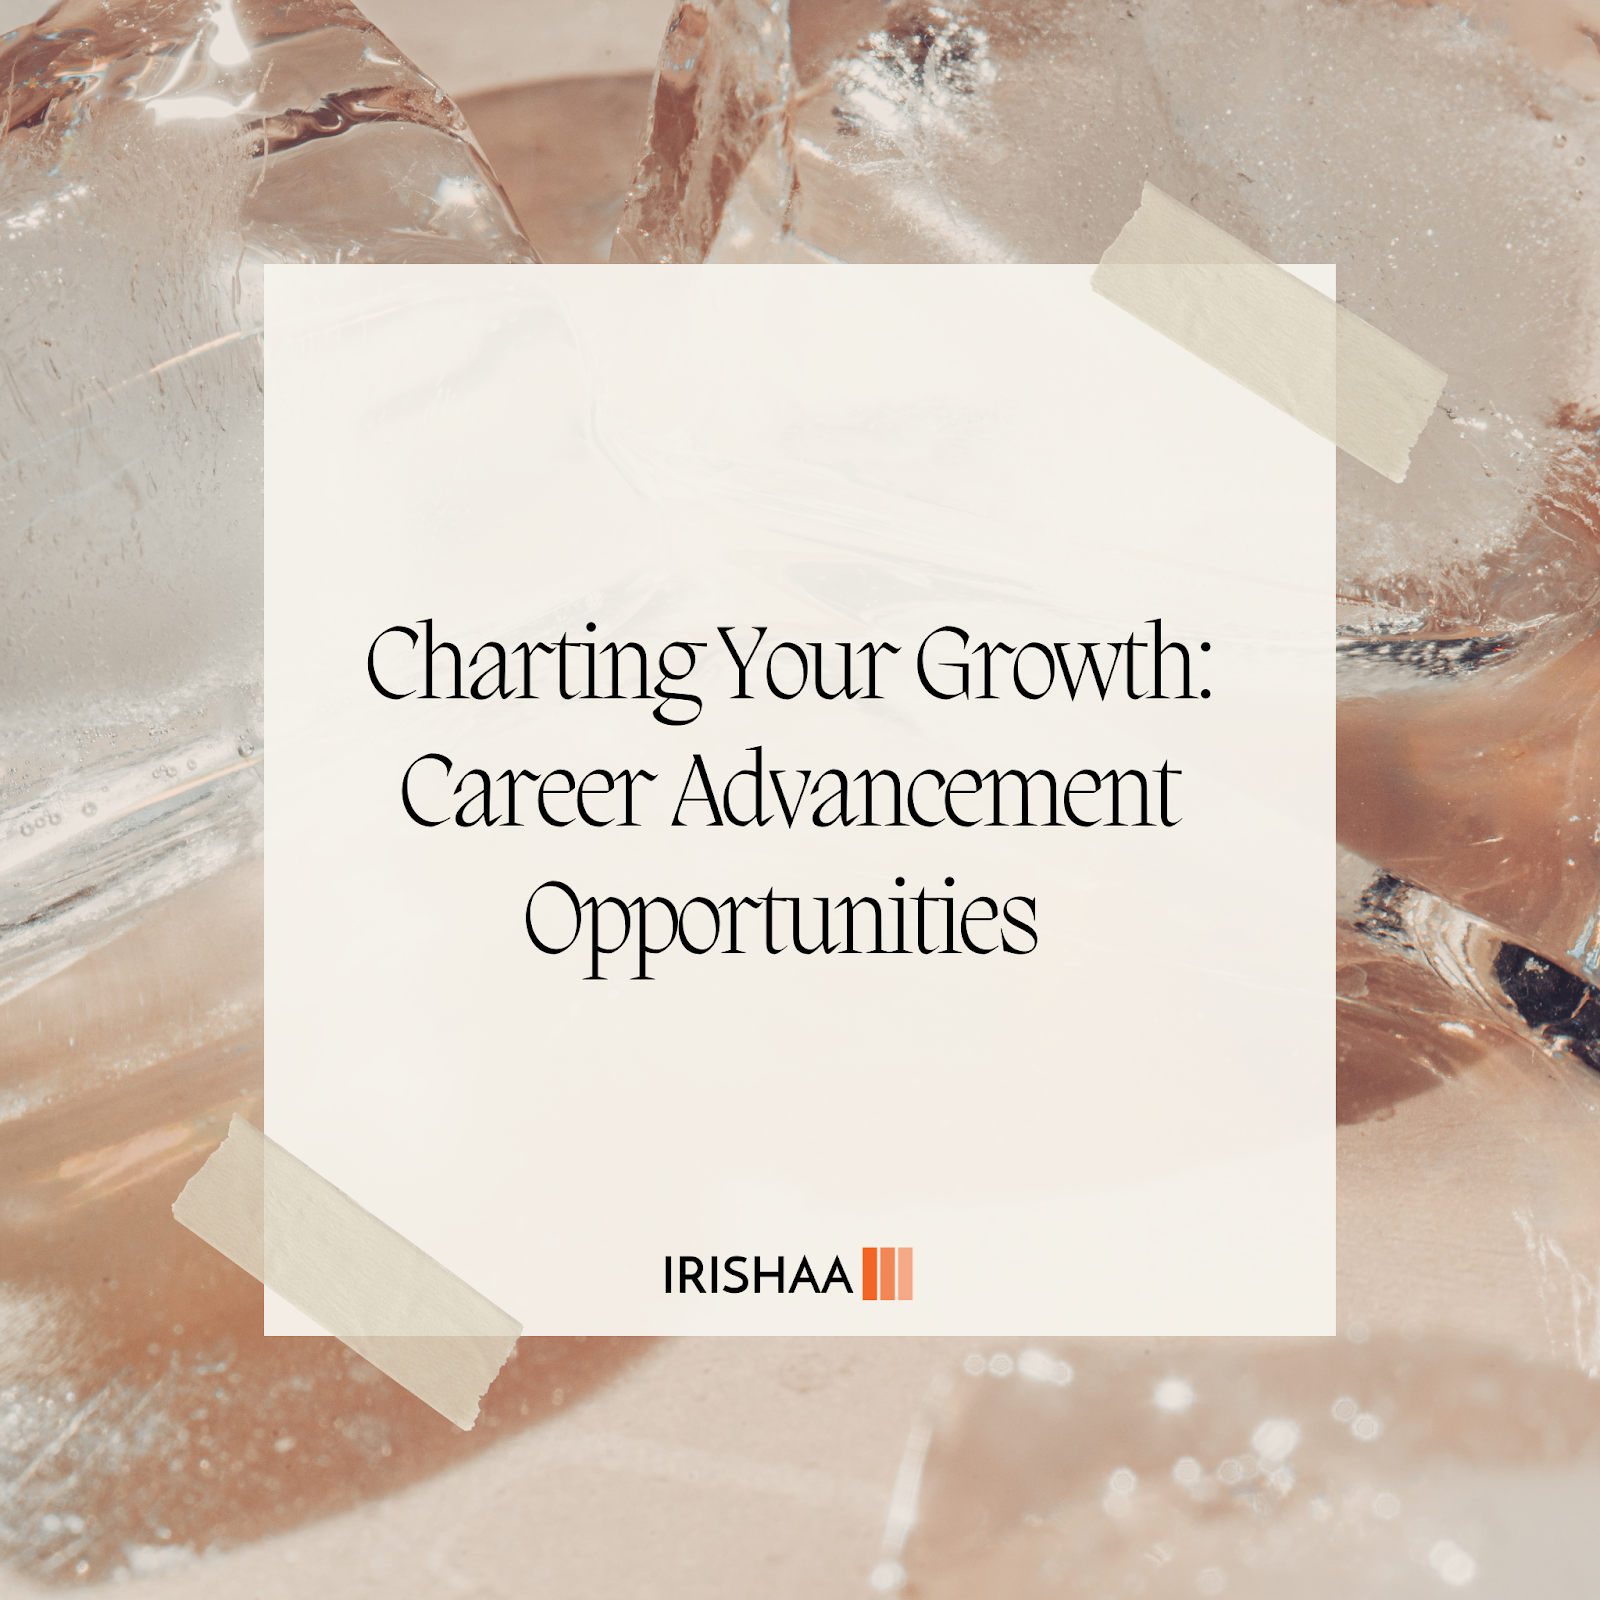 Charting Your Growth: Career Advancement Opportunities 

